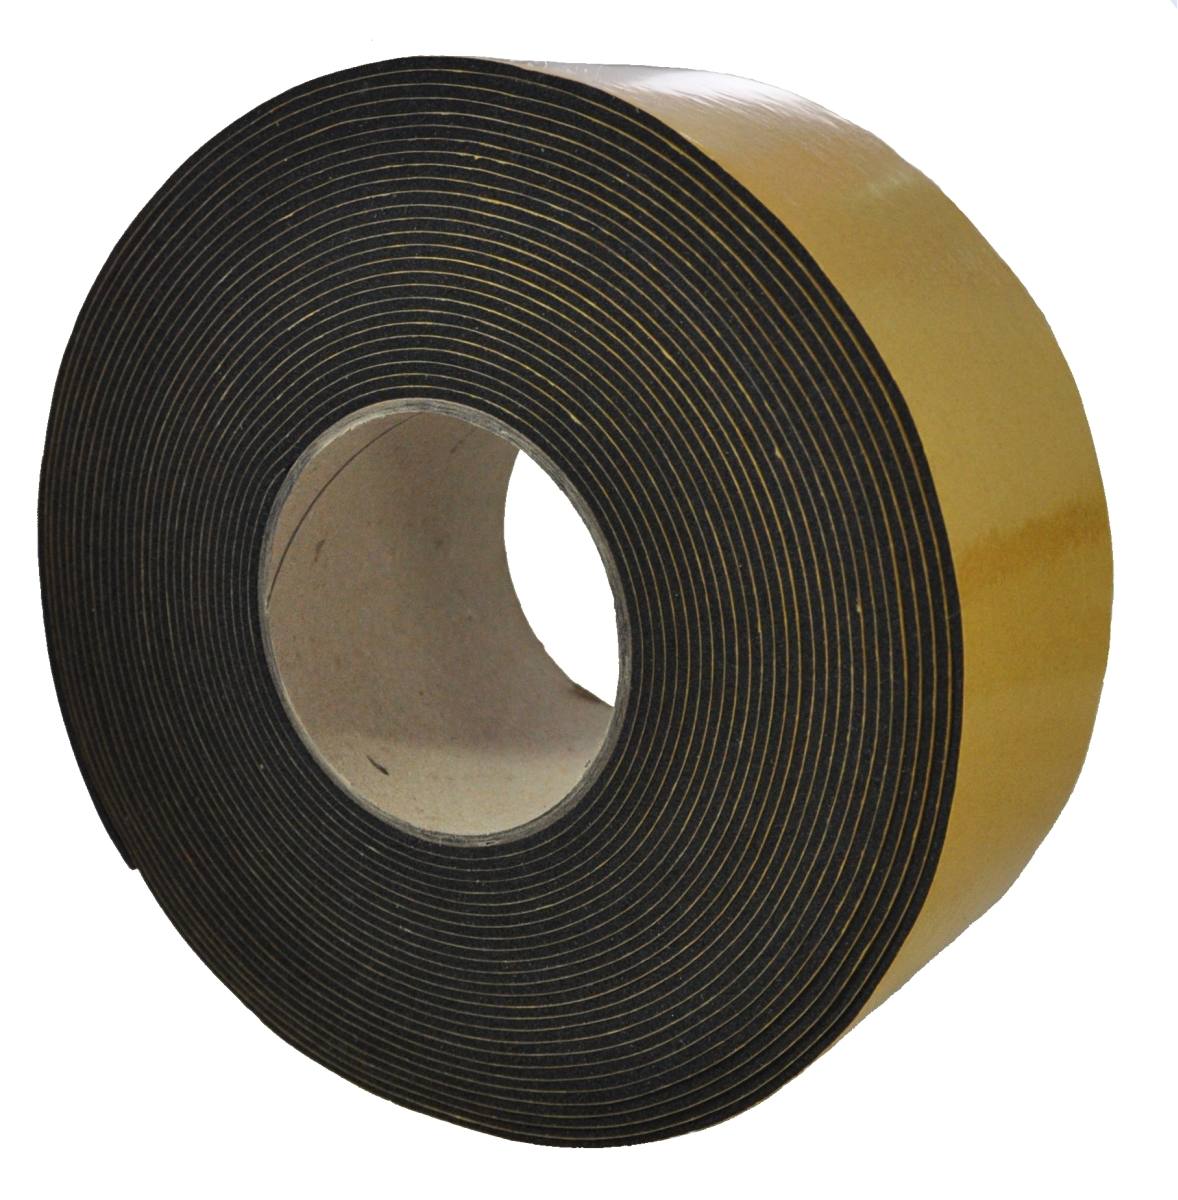 S-K-S EPDM 2mmx19mmx10m black self-adhesive on one side